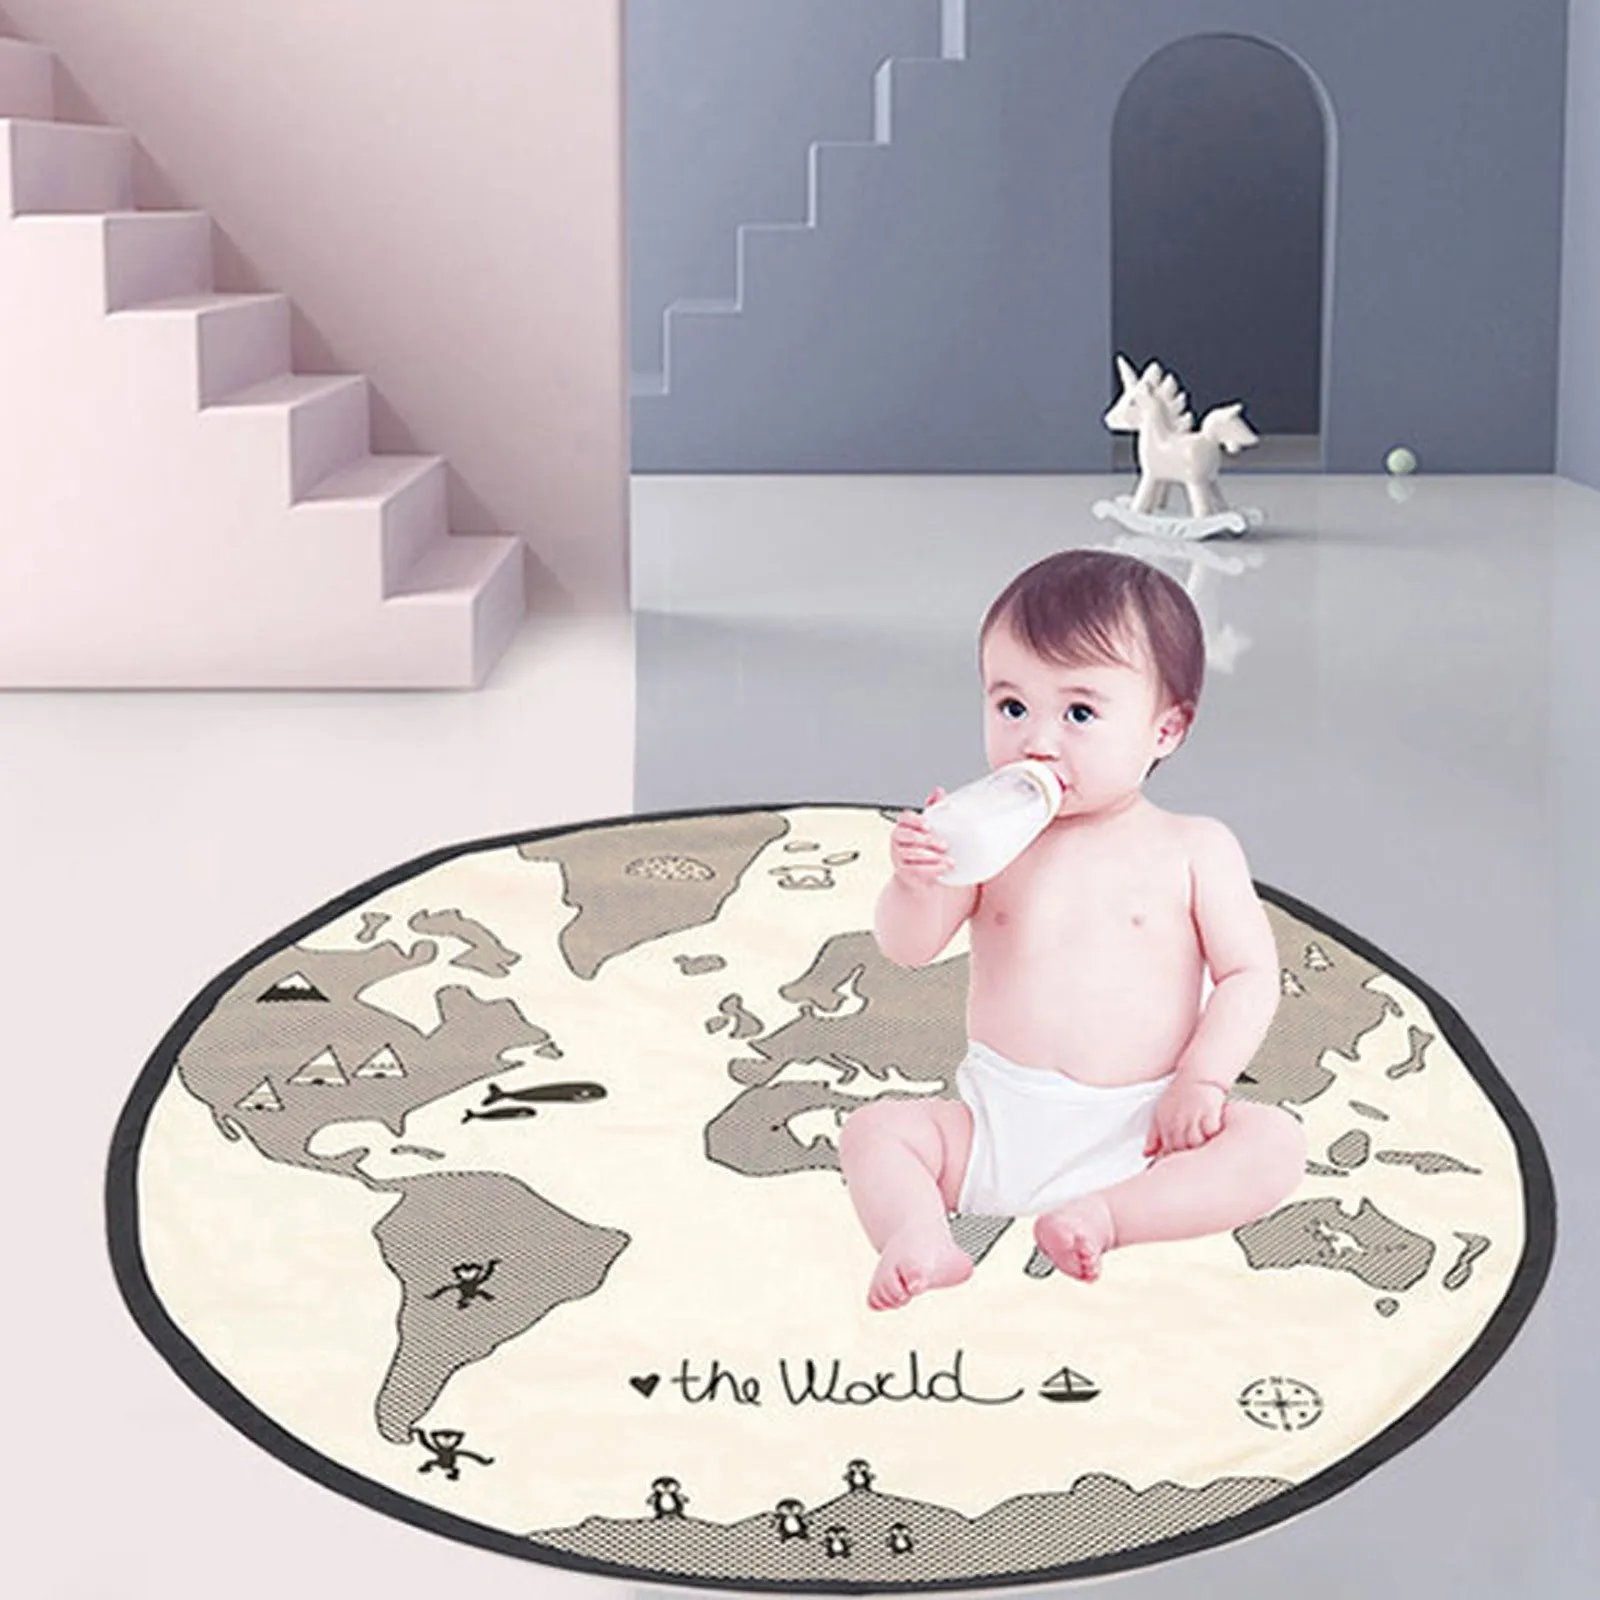 

Friends Door Frame Blanket Stroller Bed Play Mats Game Mat Kids Baby Crawling Cotton Racing Carpet Baby Care Baby Turban Knot